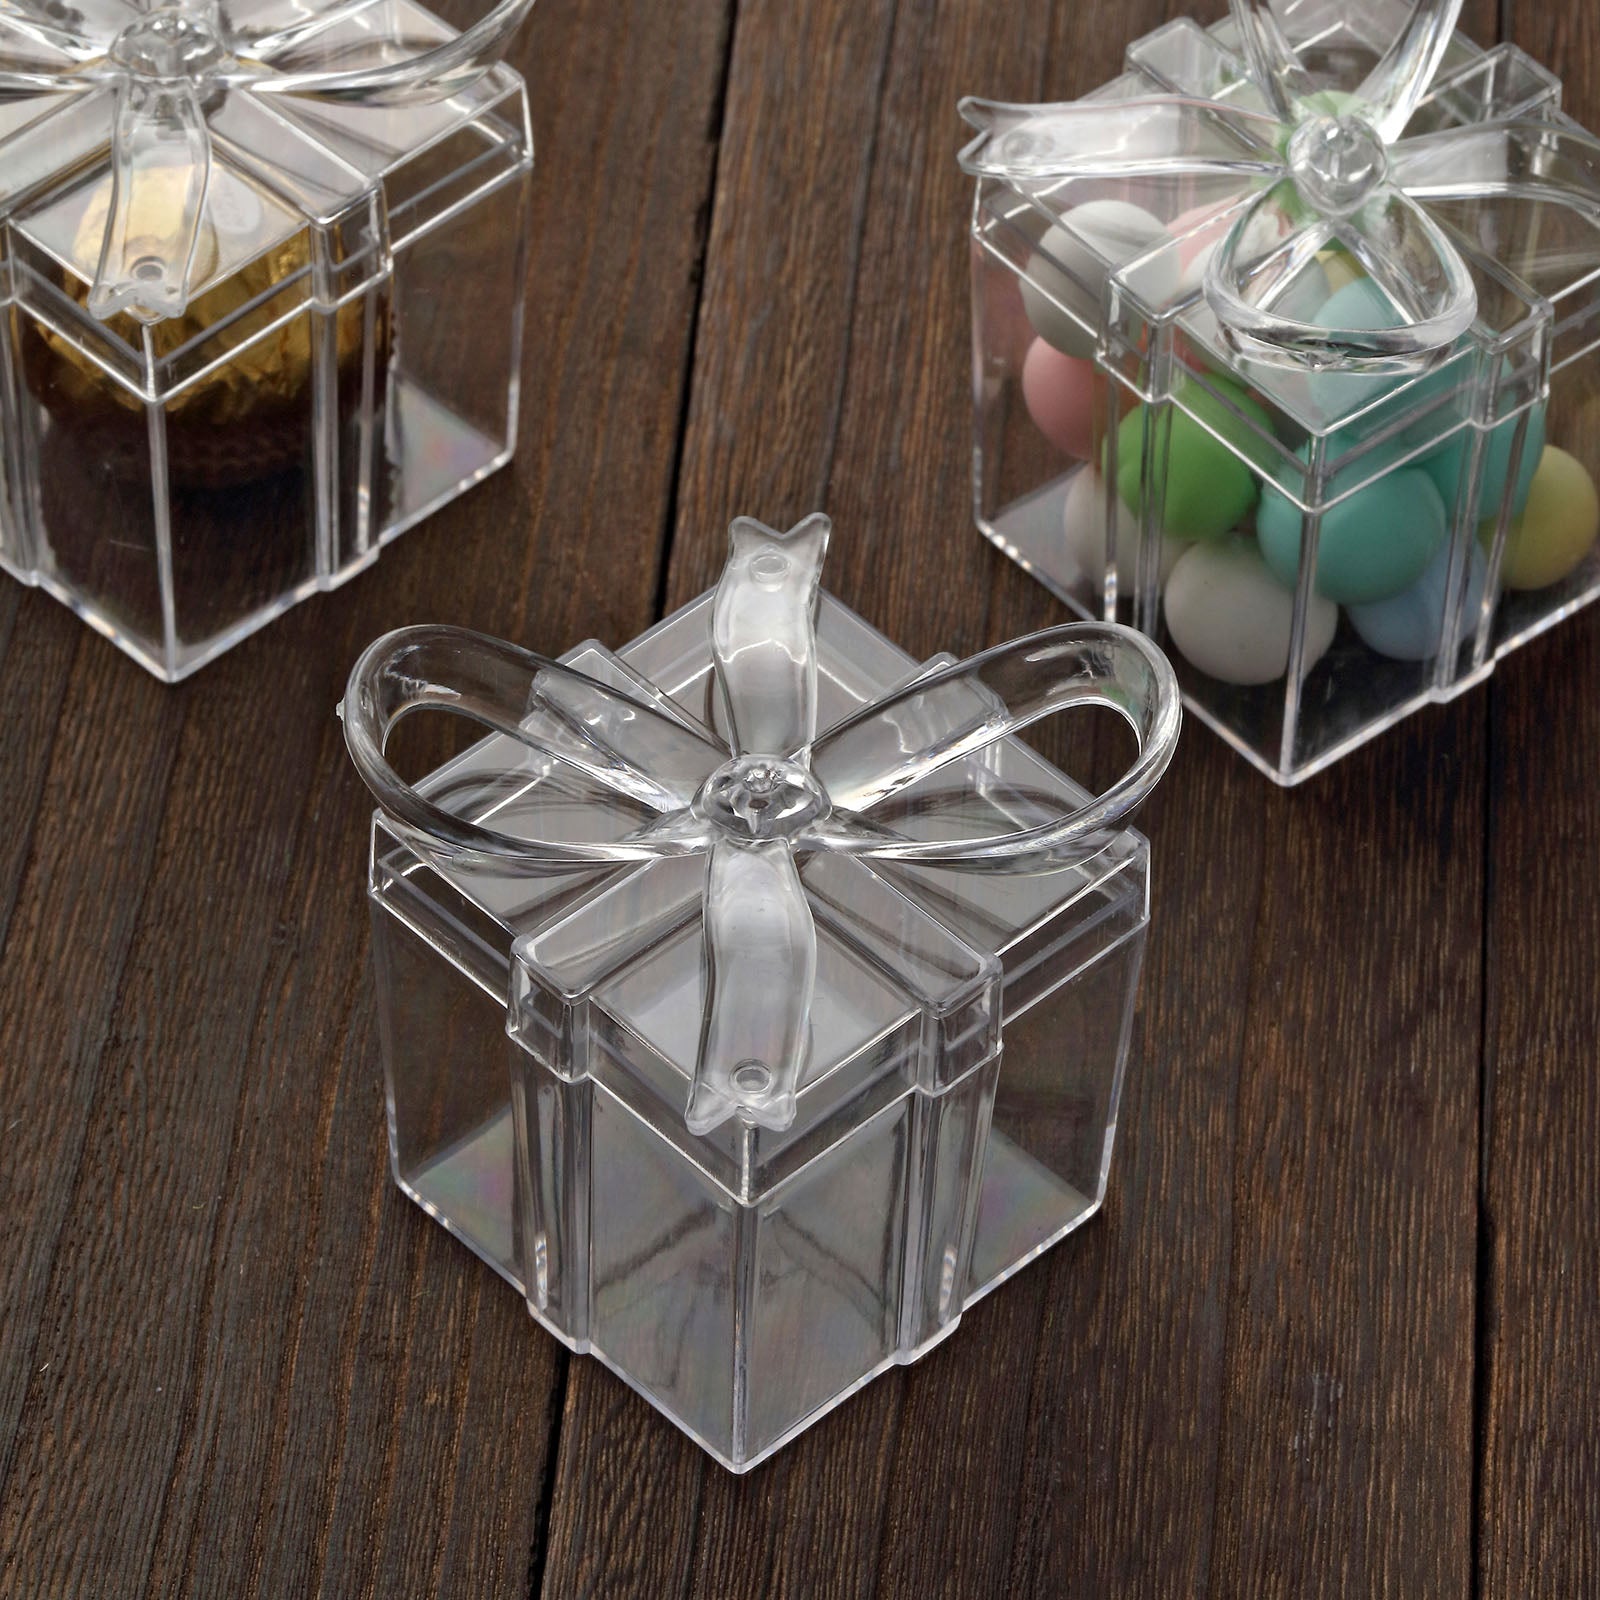 12 Pack | 3 Square Clear Bow Top Plastic Party Favor Boxes, Transparent Candy Container Gift Boxes | by Tableclothsfactory